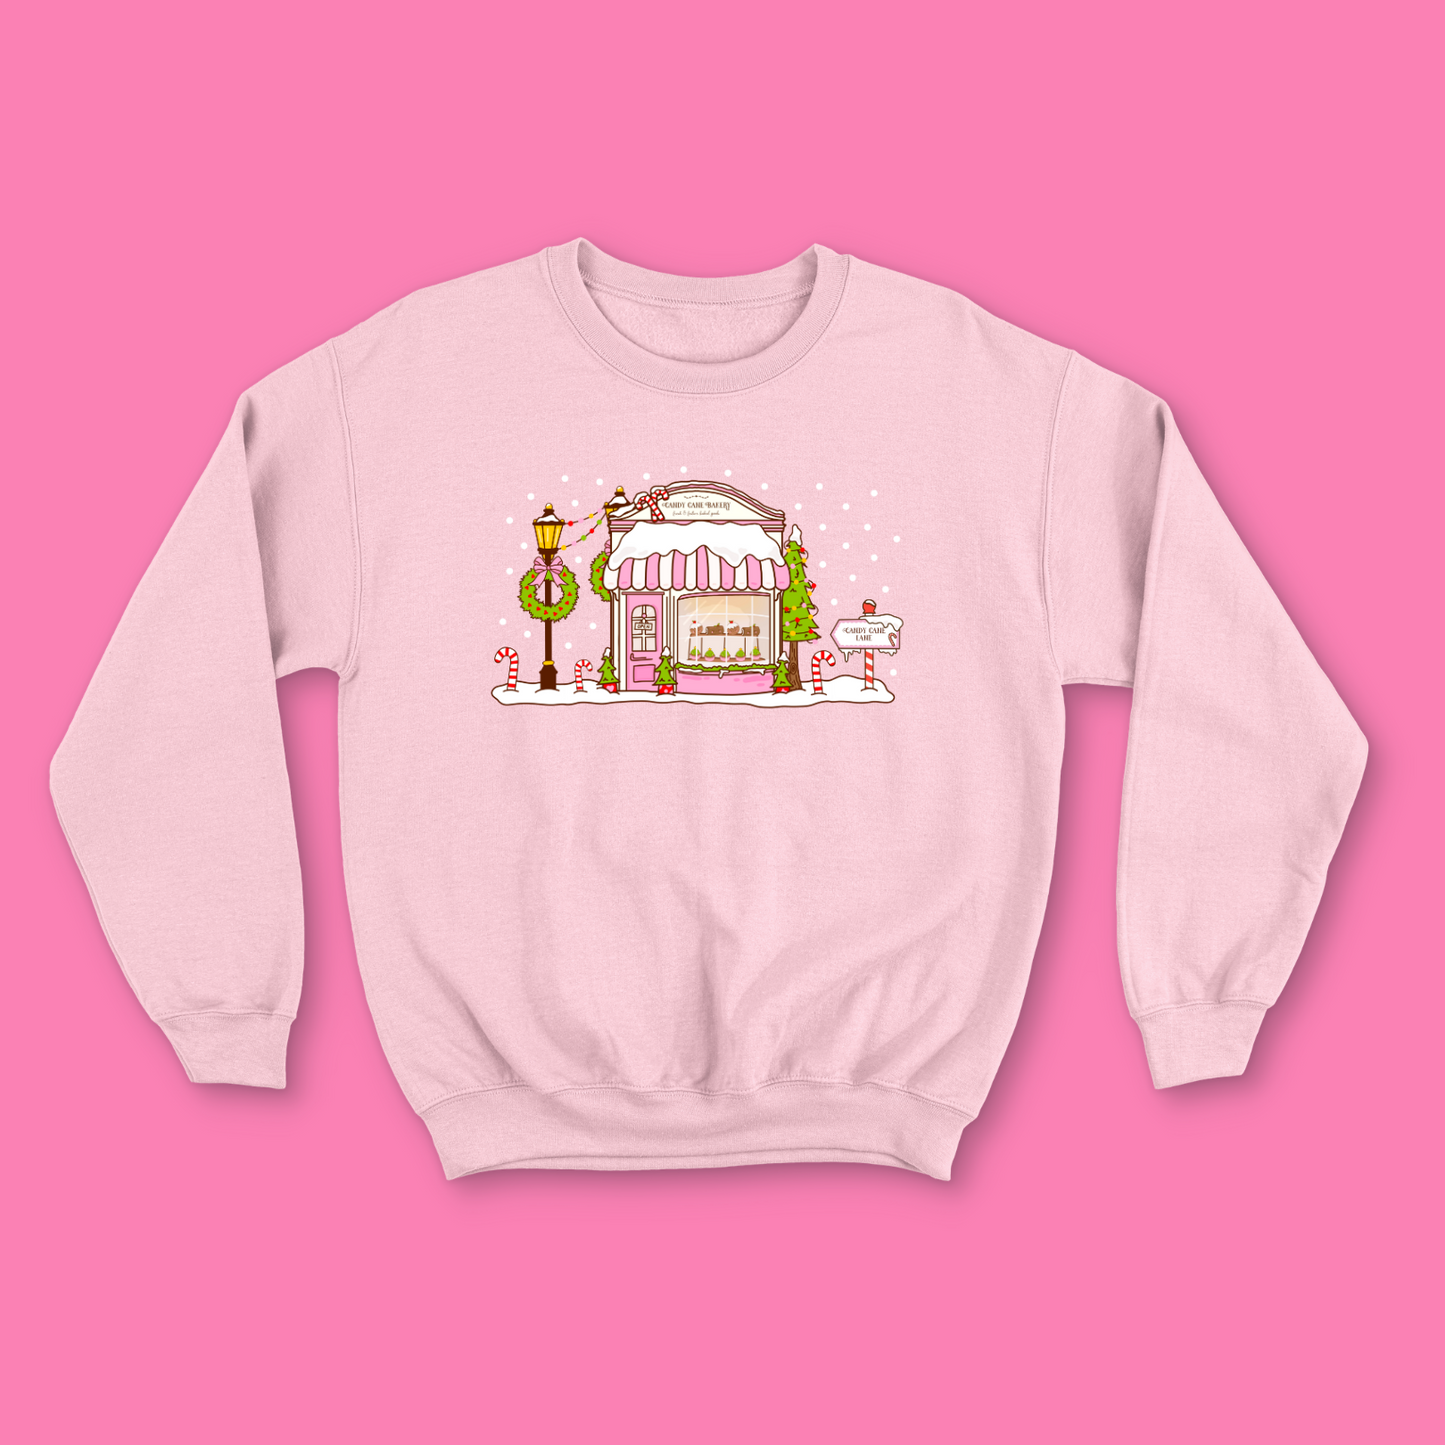 The Candy Cane Bakery Sweater